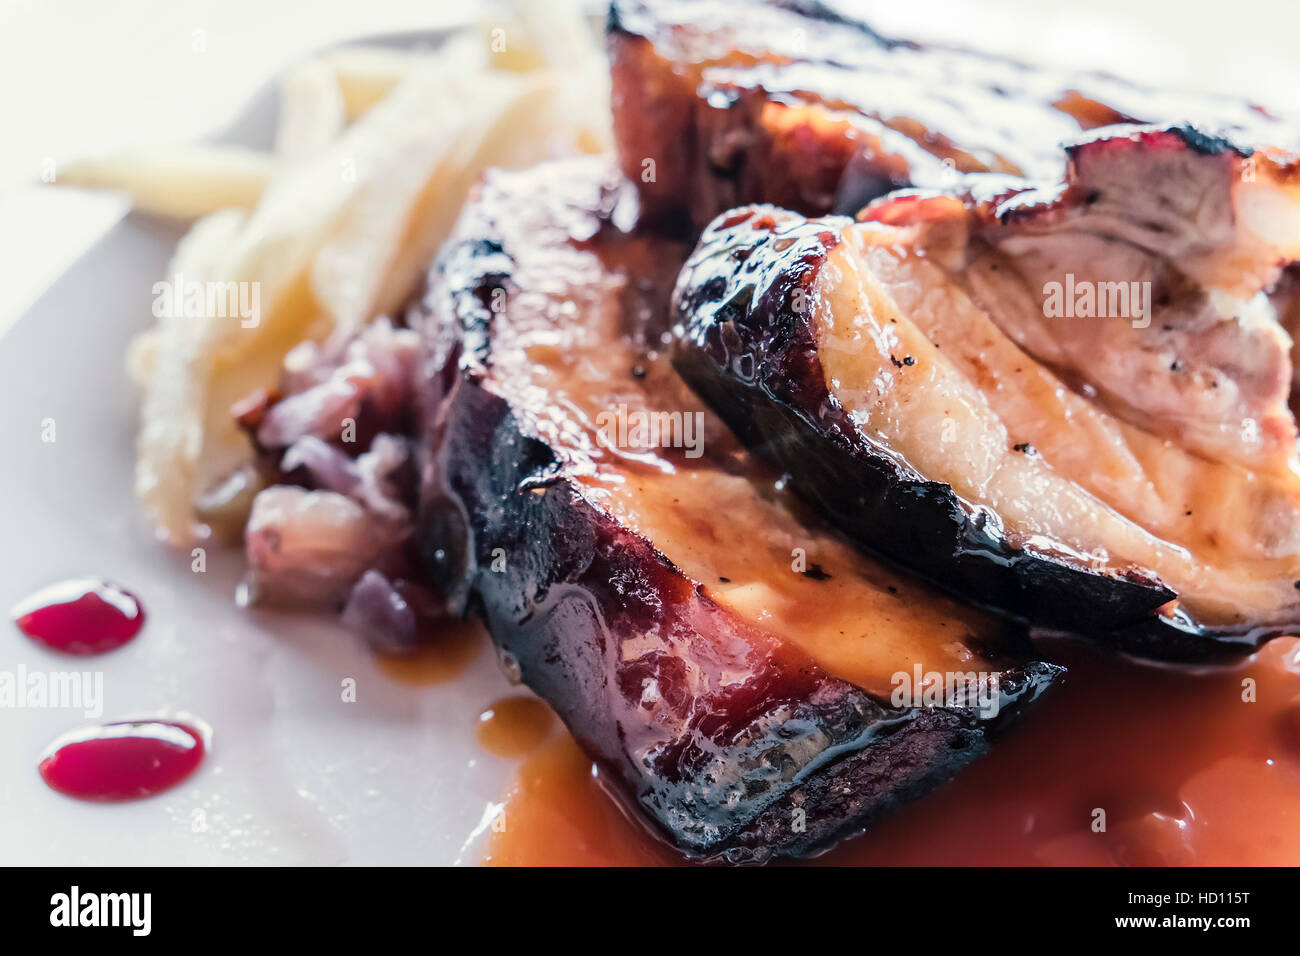 Spanish spare ribs, boned and served with red honey dip and french fries as side dish. Stock Photo